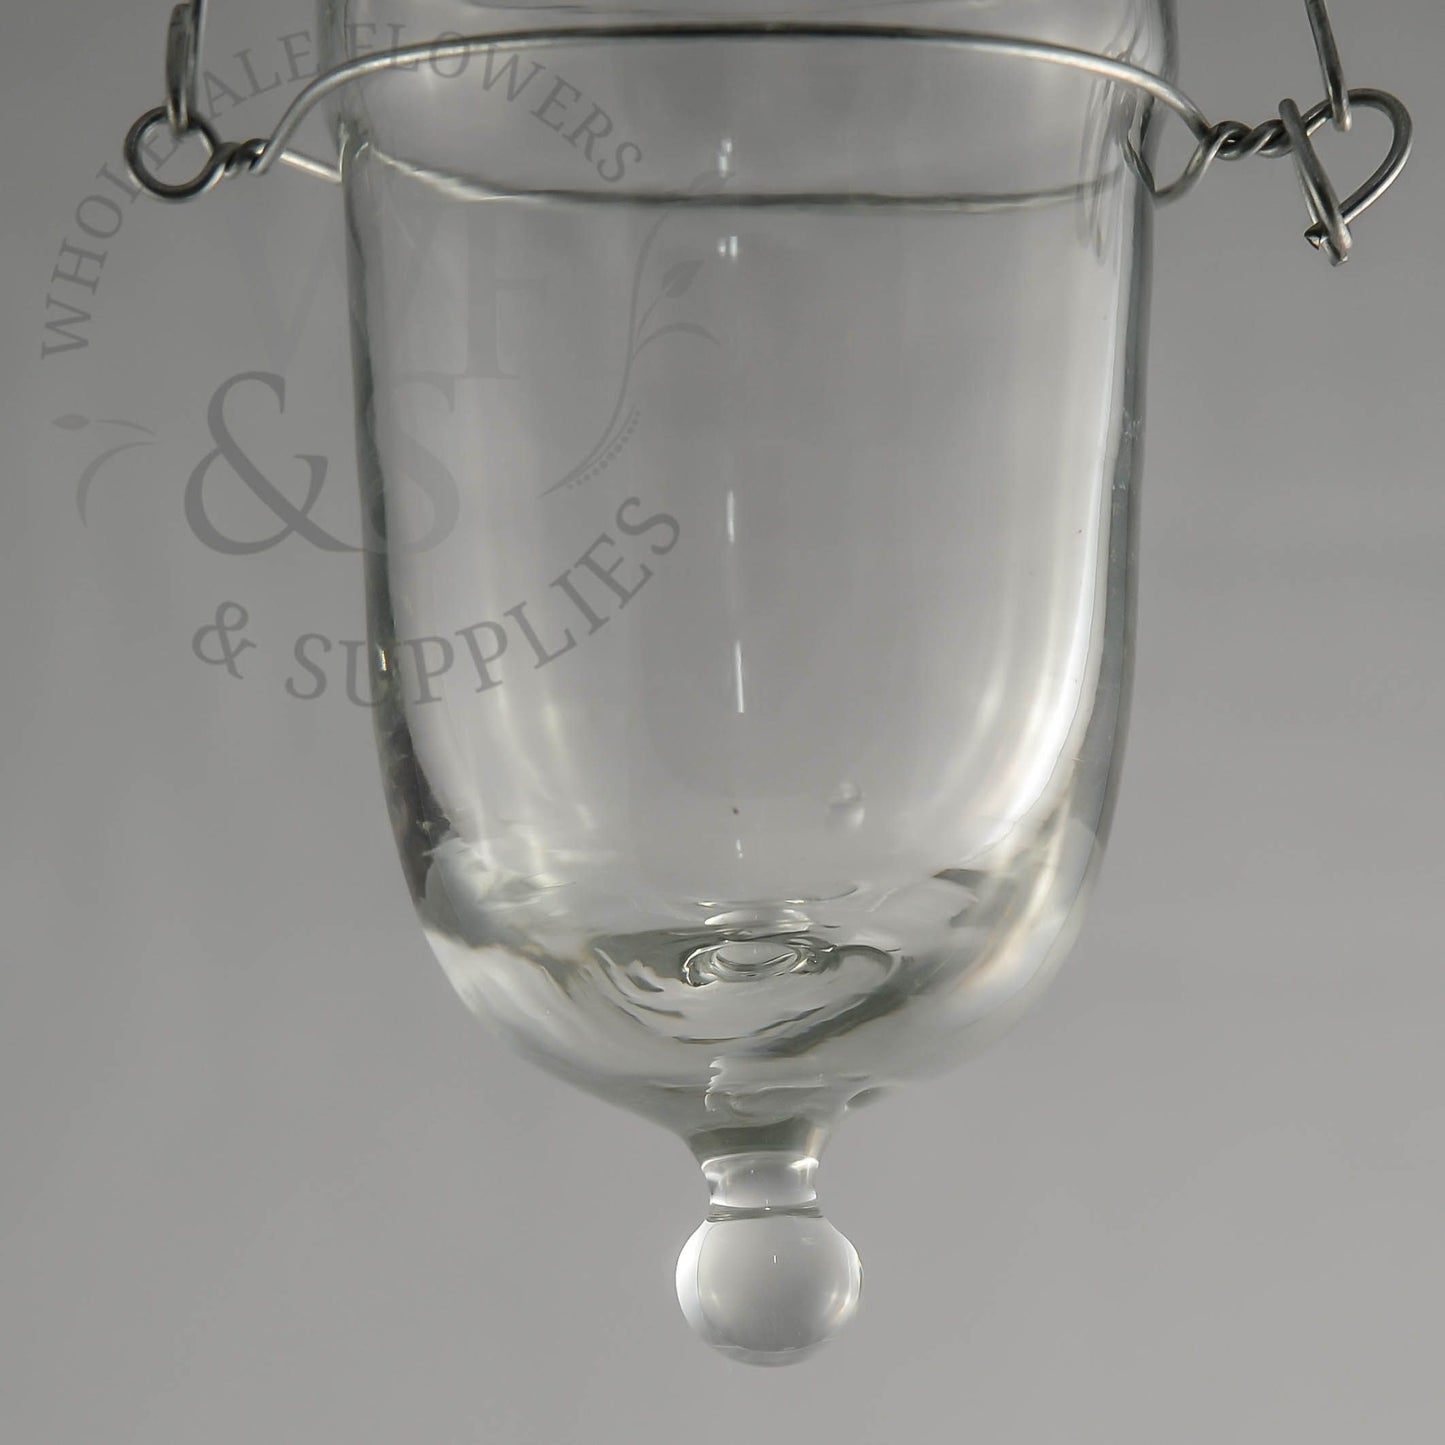 Clear Glass Hanging Votive Holder - Tall and Skinny - FREE SHIPPING ON ORDERS GREATER THAN $50